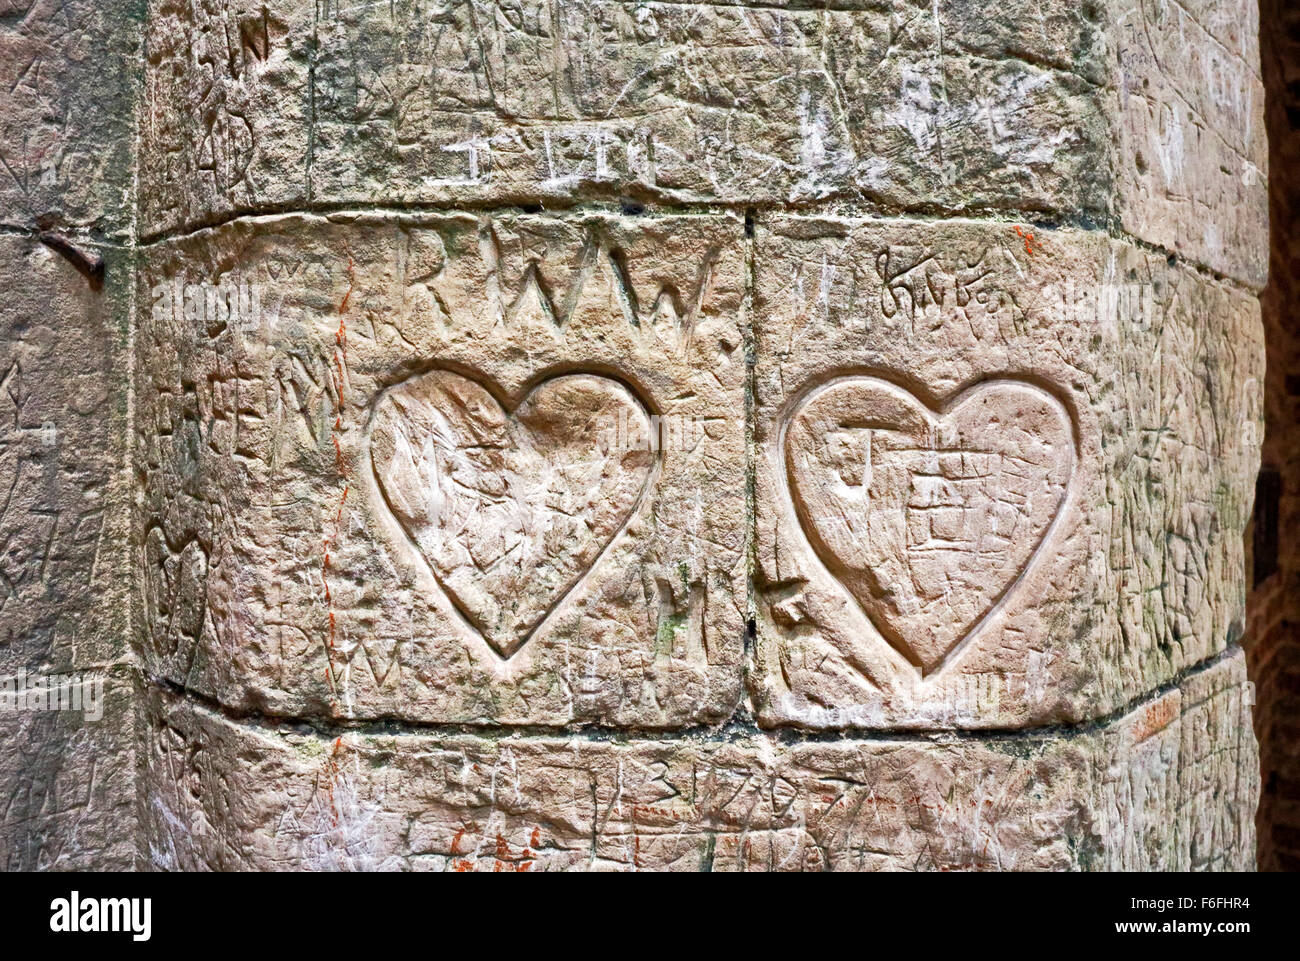 Heart shaped graffiti carved into the stonework of the ruined gatehouse of St Benet's Abbey near Ludham, Norfolk, England, UK. Stock Photo